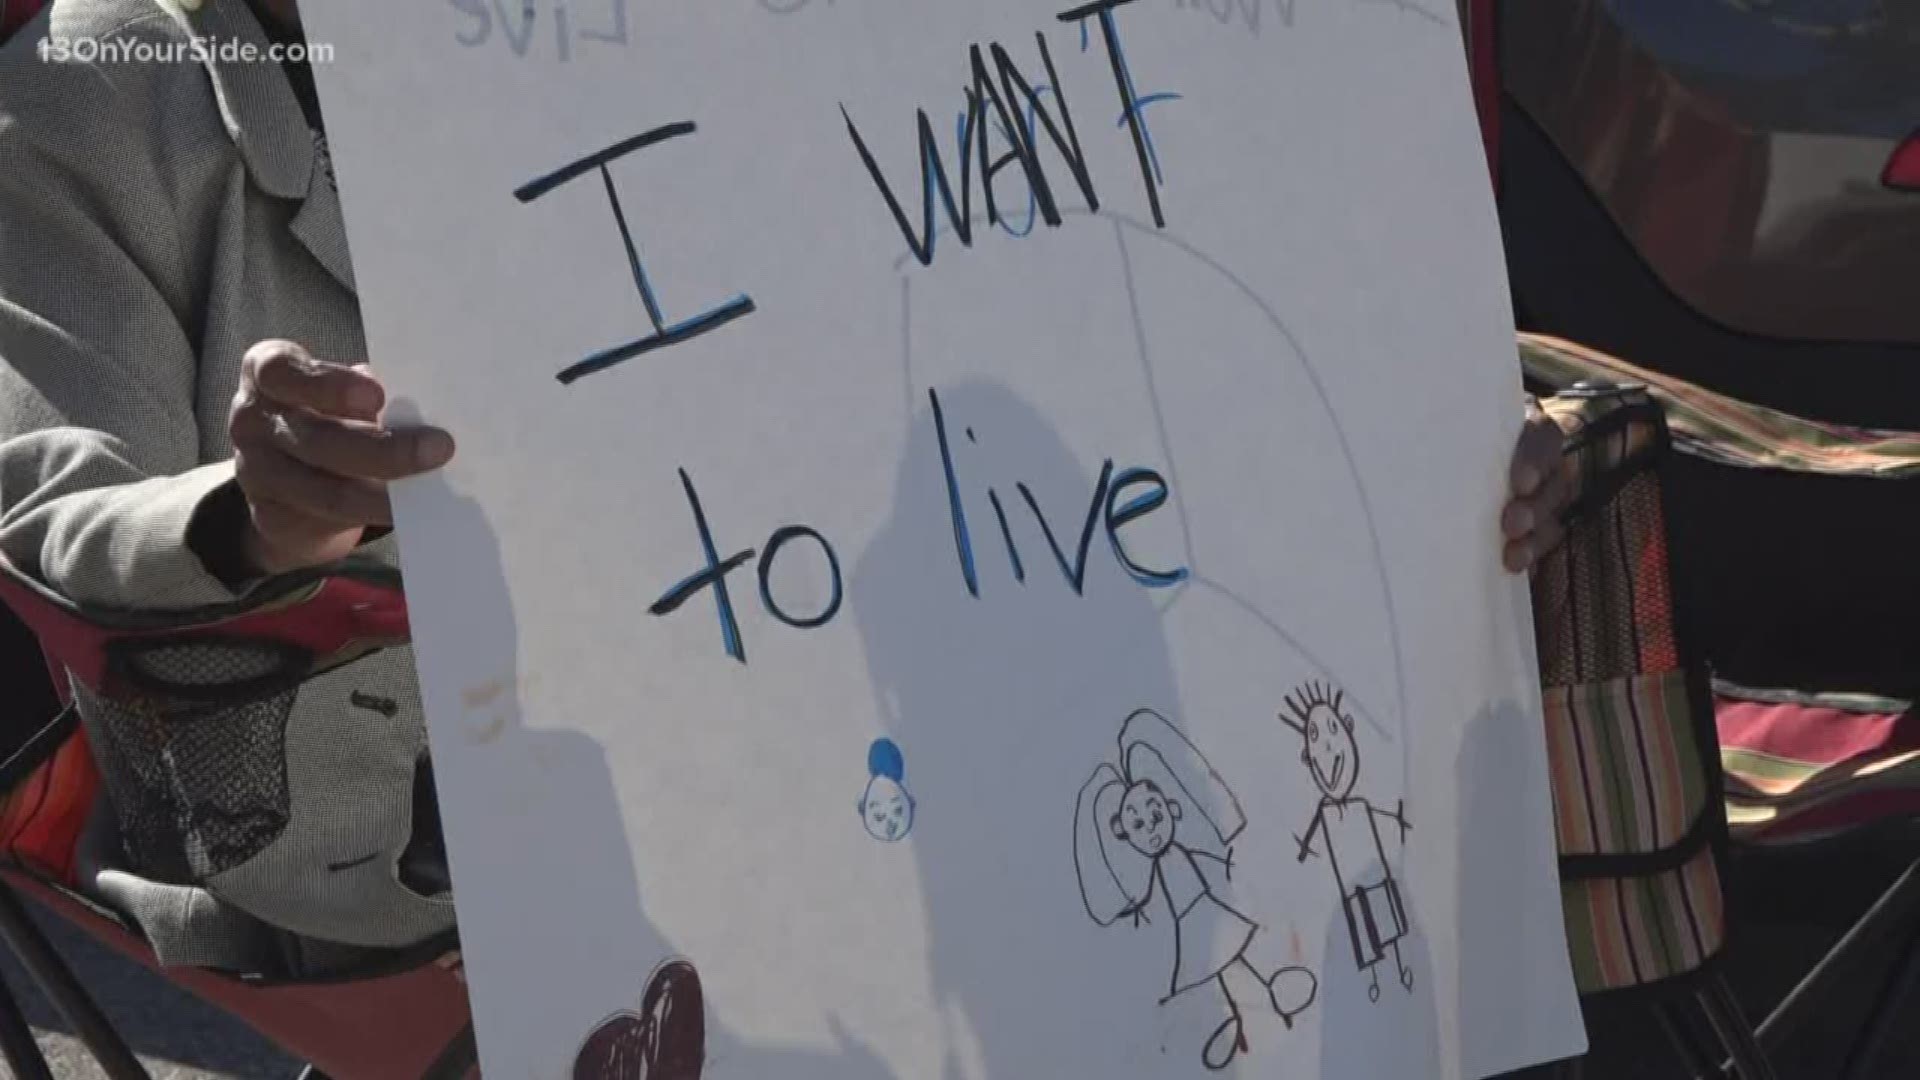 Community holds Stop the Violence walk in Grand Rapids